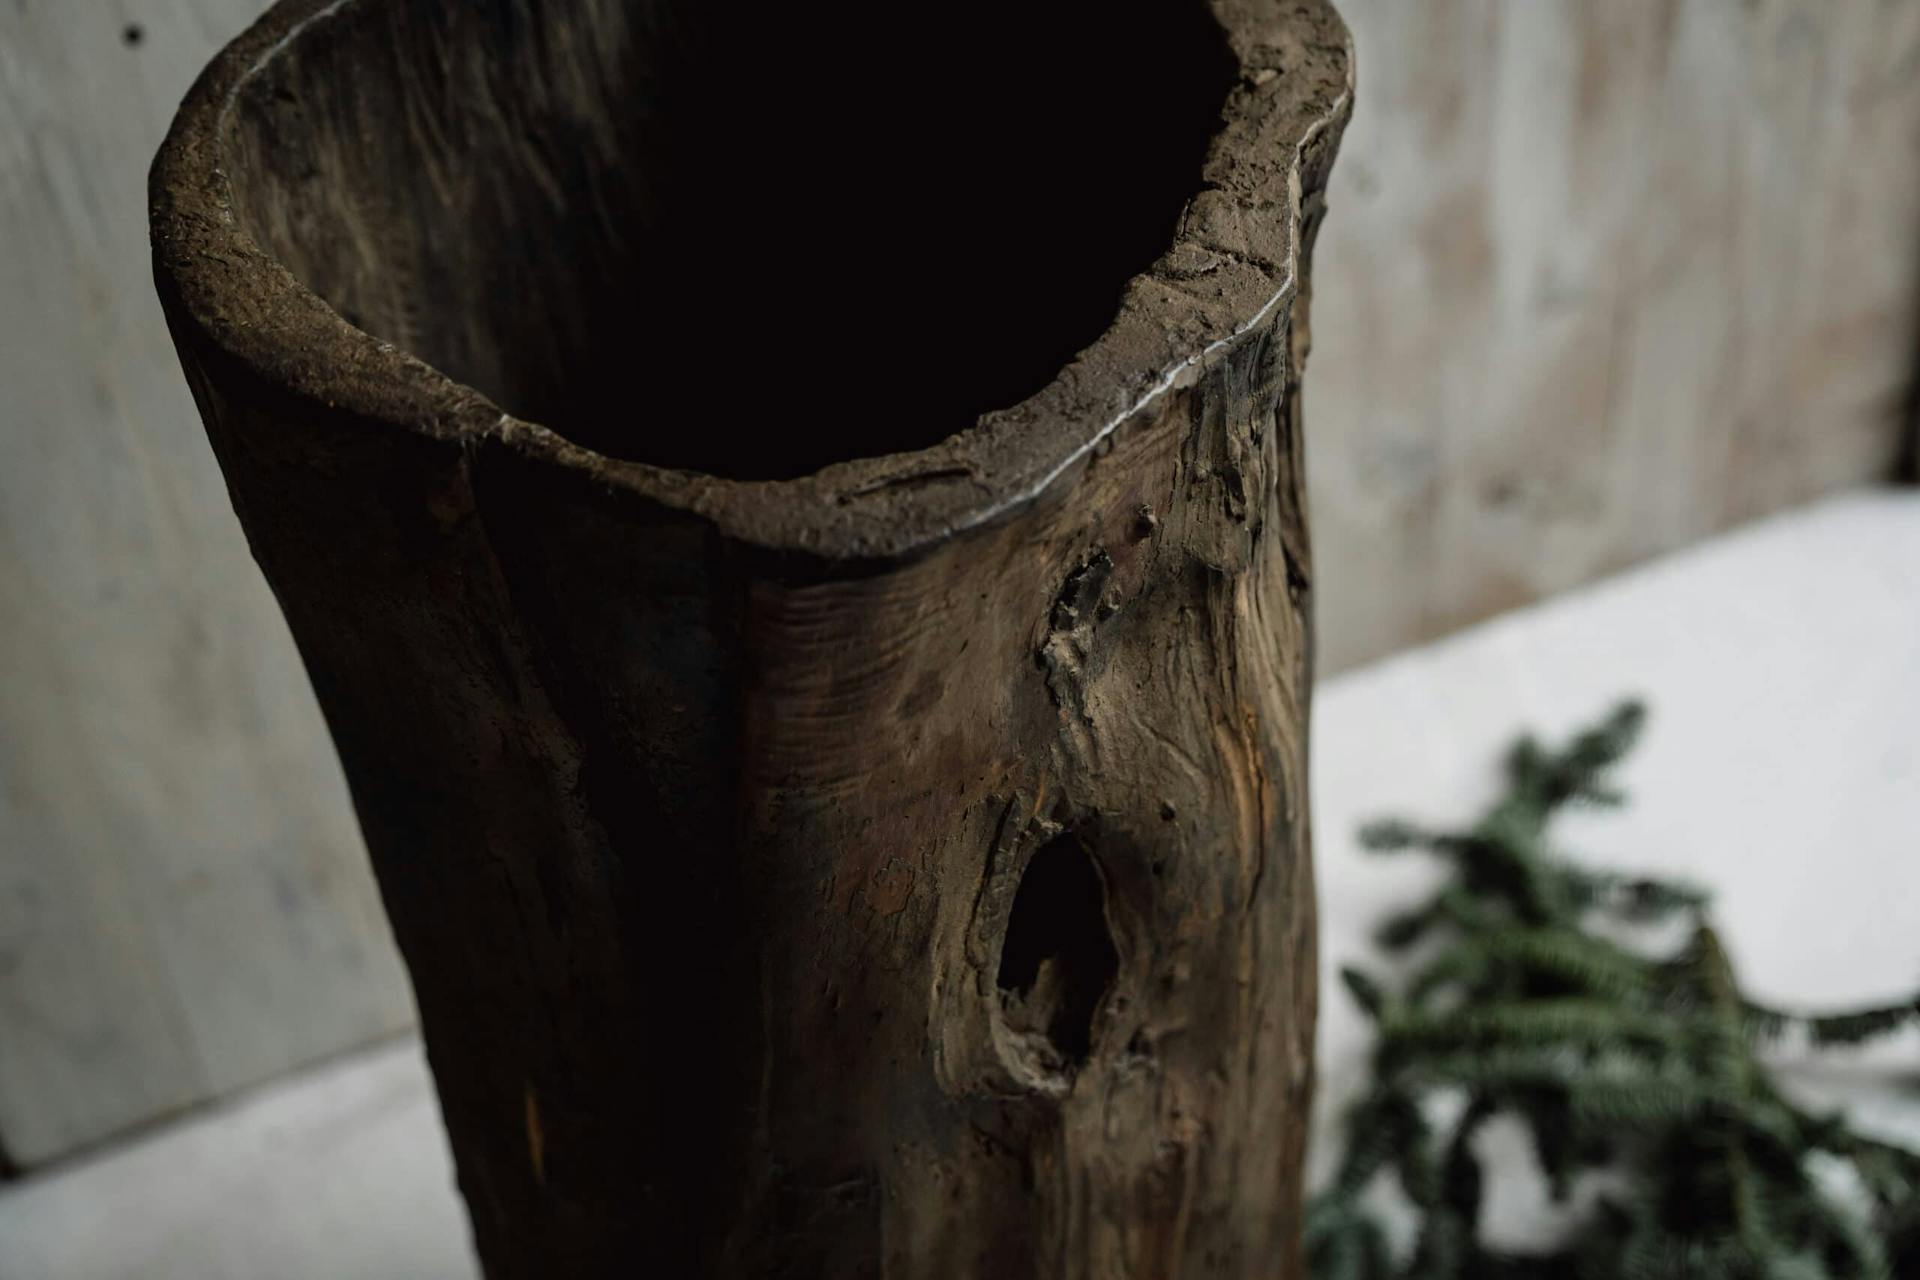 Rustic and Gnarly Dug Out Tree Planter